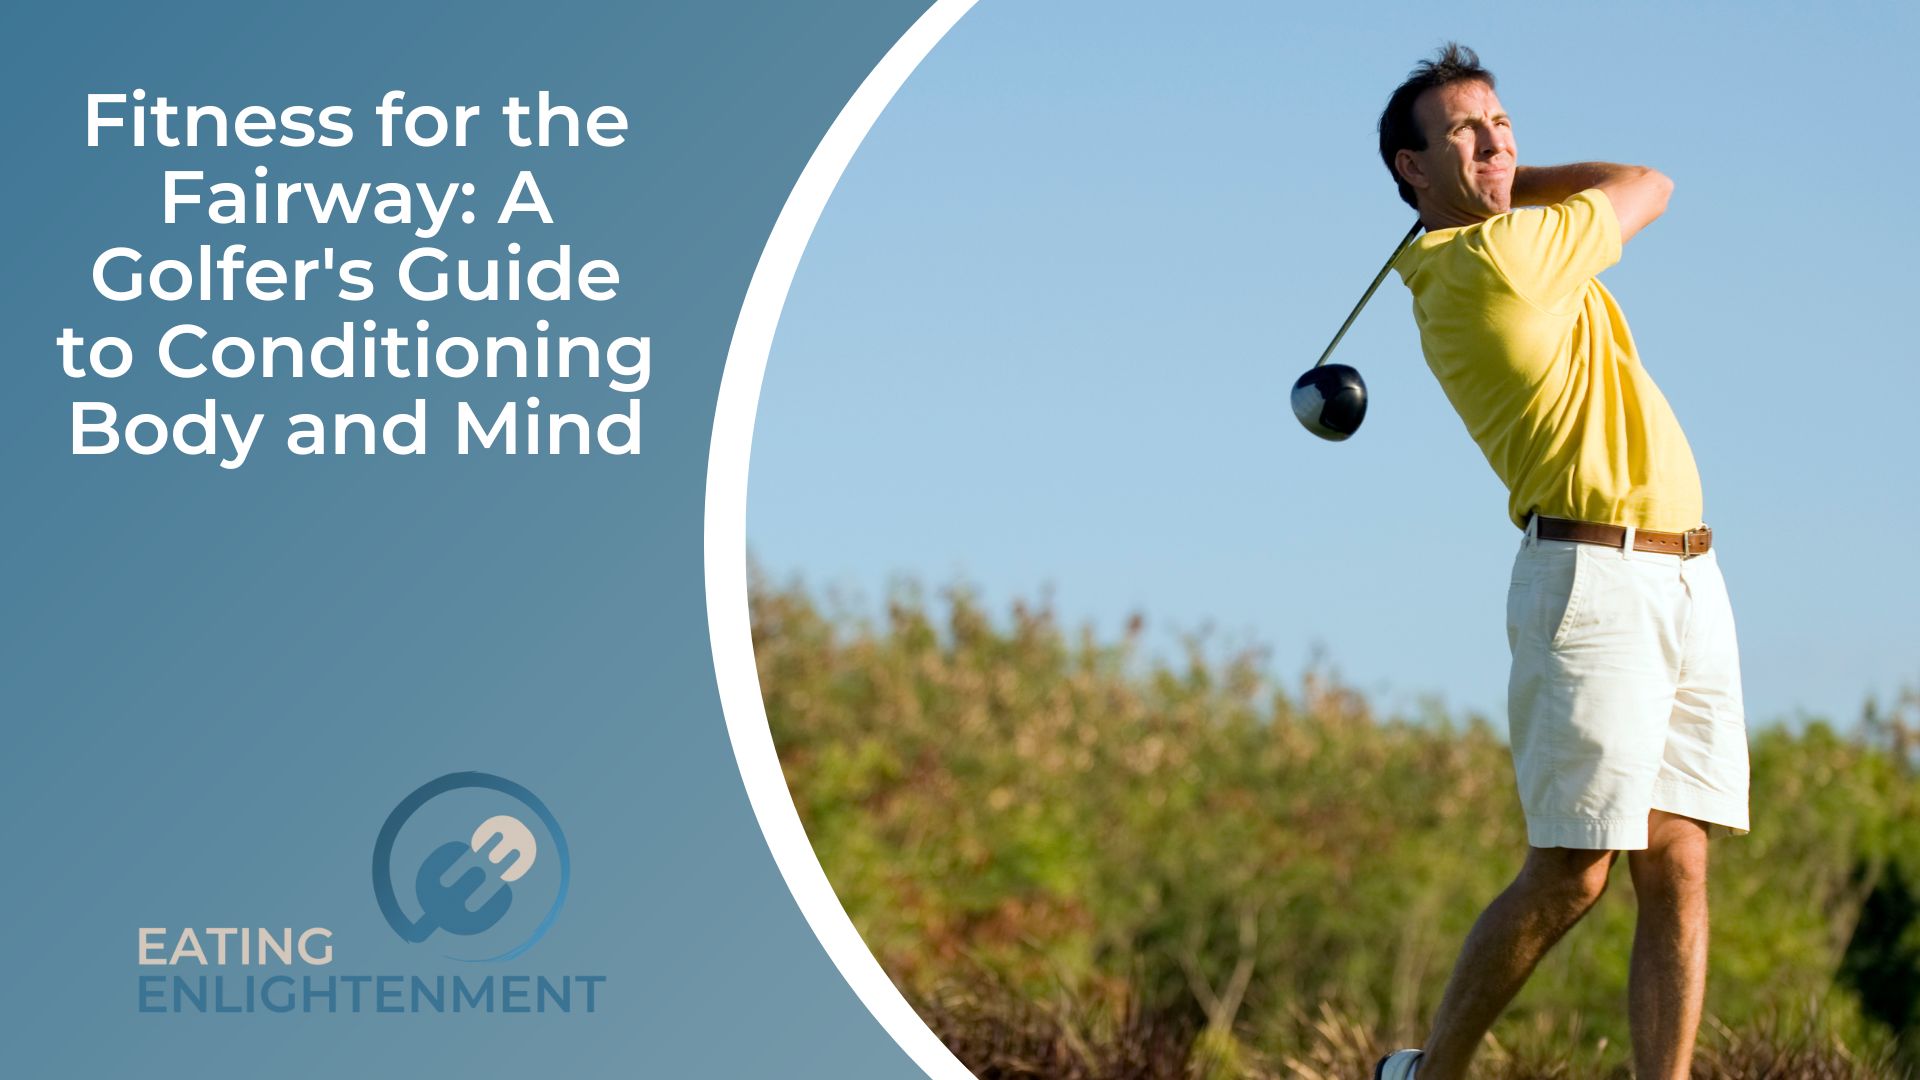 Fitness for the Fairway A Golfer's Guide to Conditioning Body and Mind